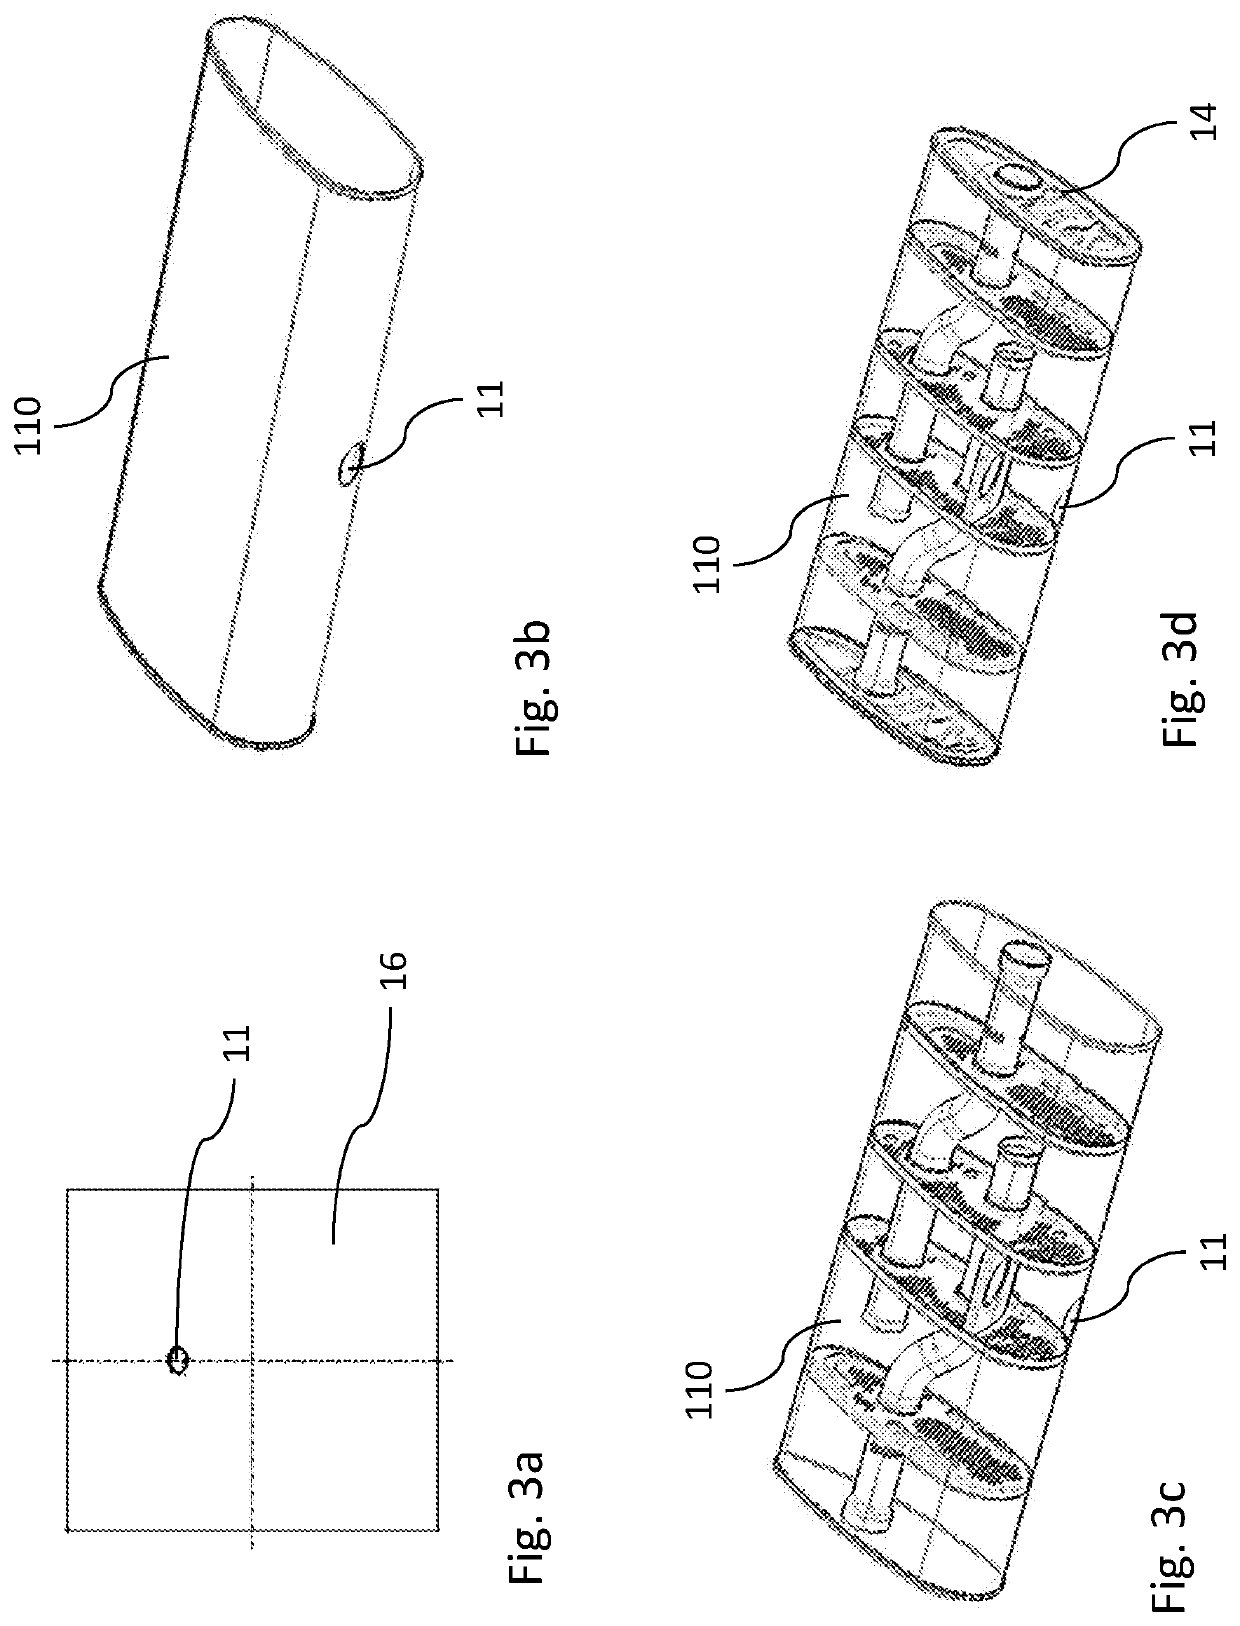 Method for forming a collar in a muffler housing